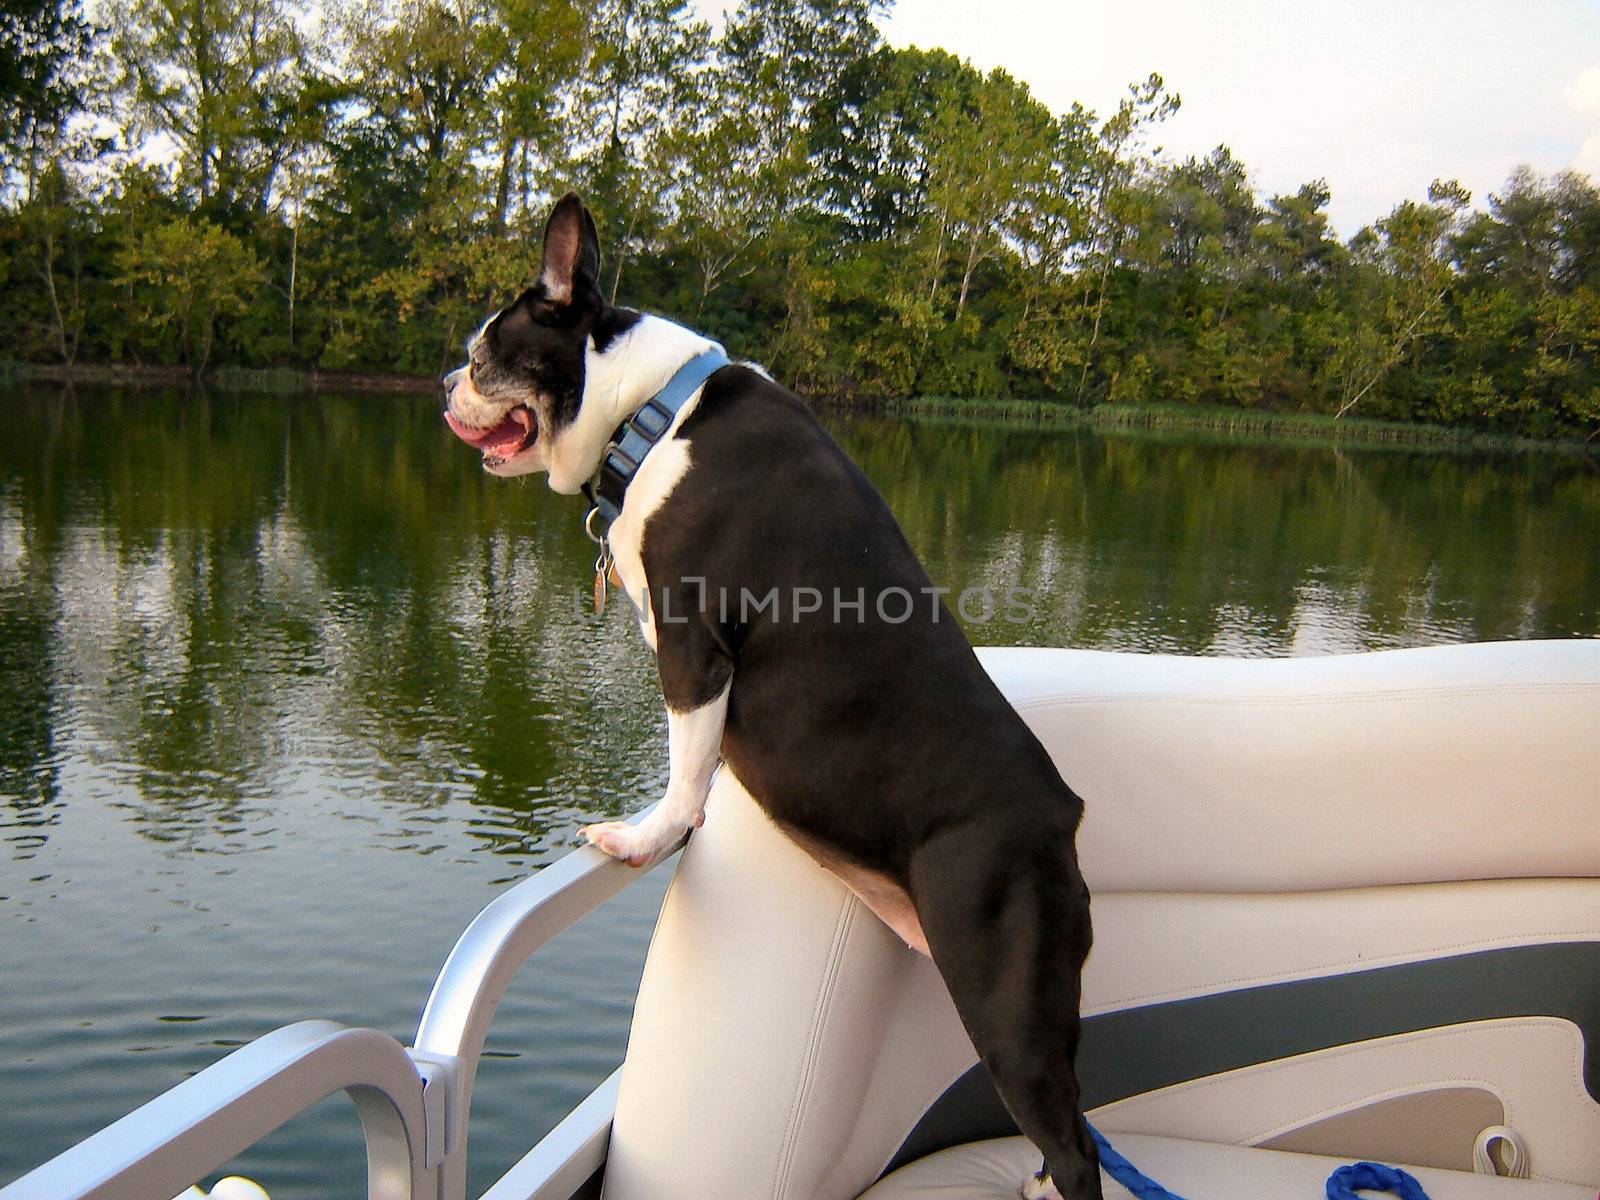 Boston Terrier on a boat ride by RefocusPhoto